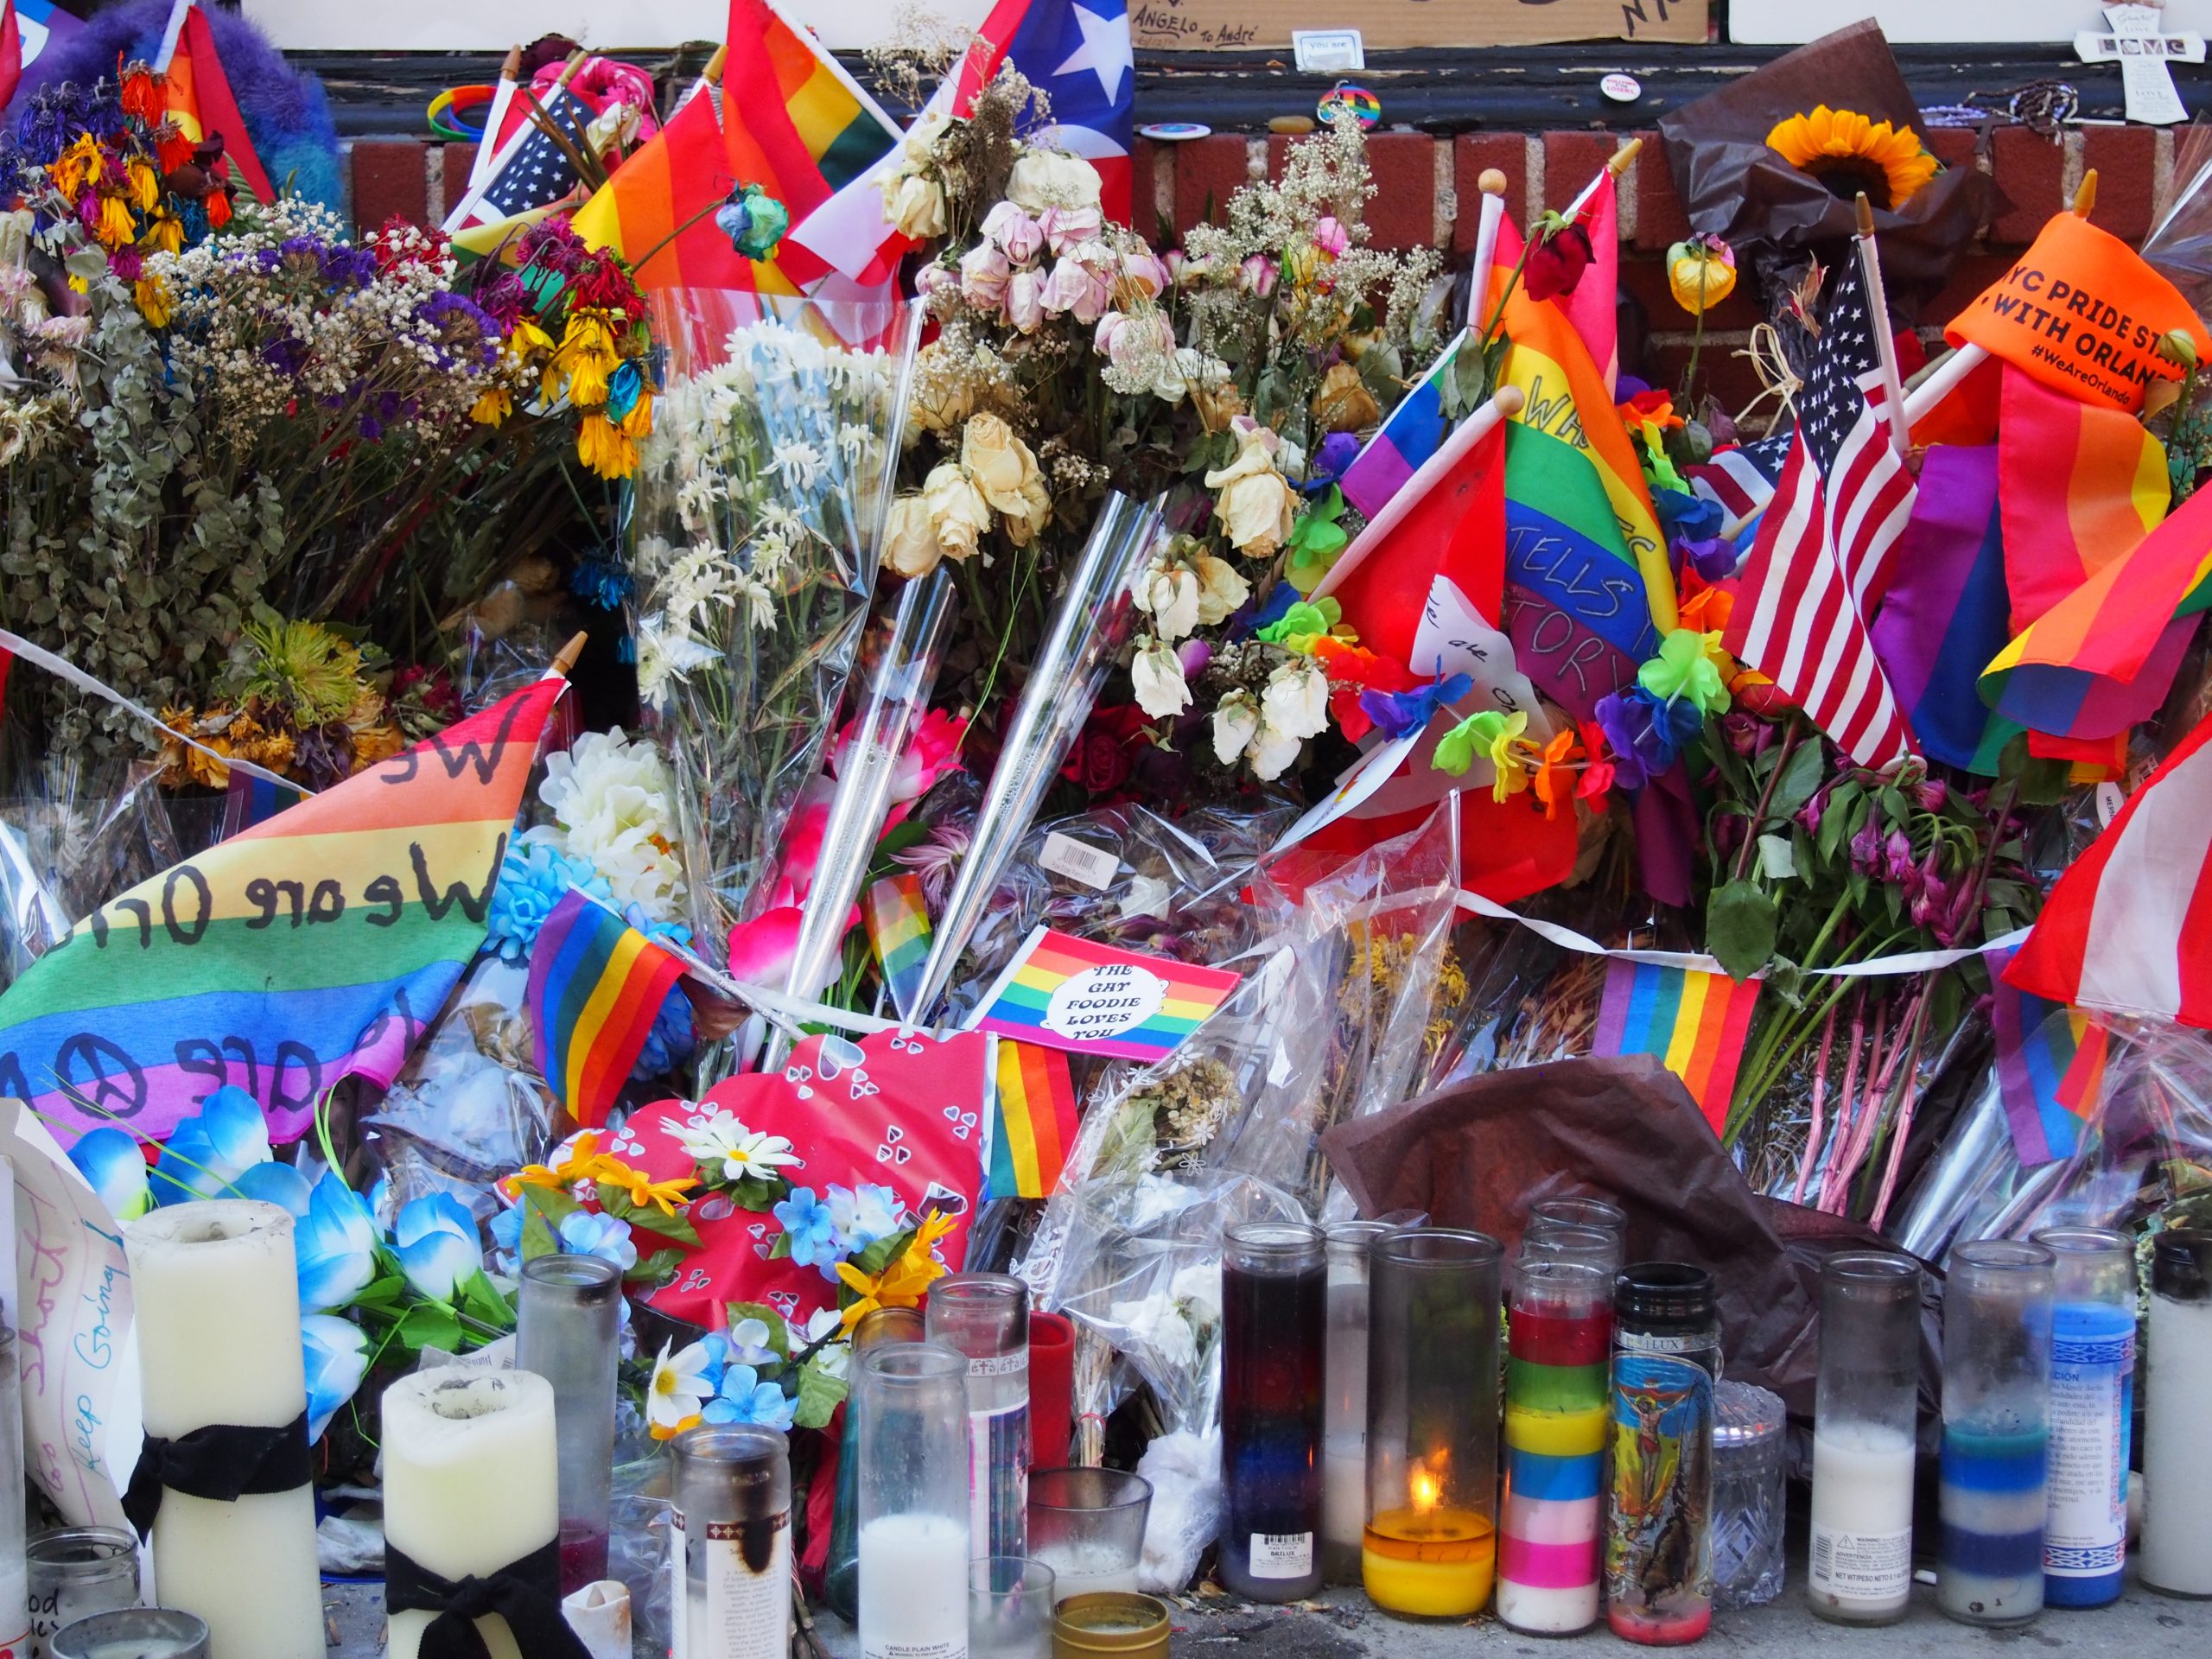 Rainbow flags surrounded by candles and flowers.